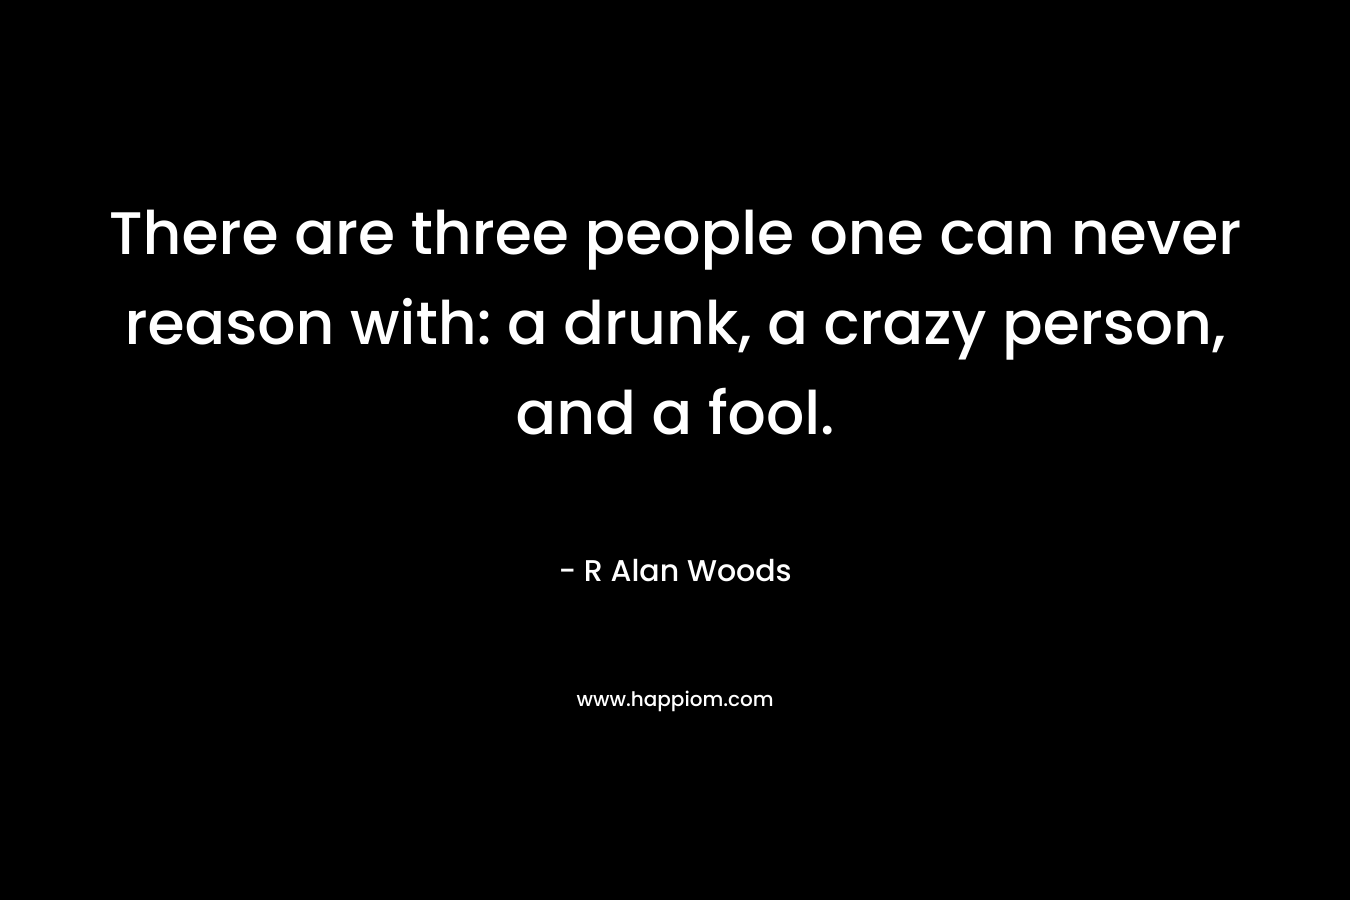 There are three people one can never reason with: a drunk, a crazy person, and a fool.